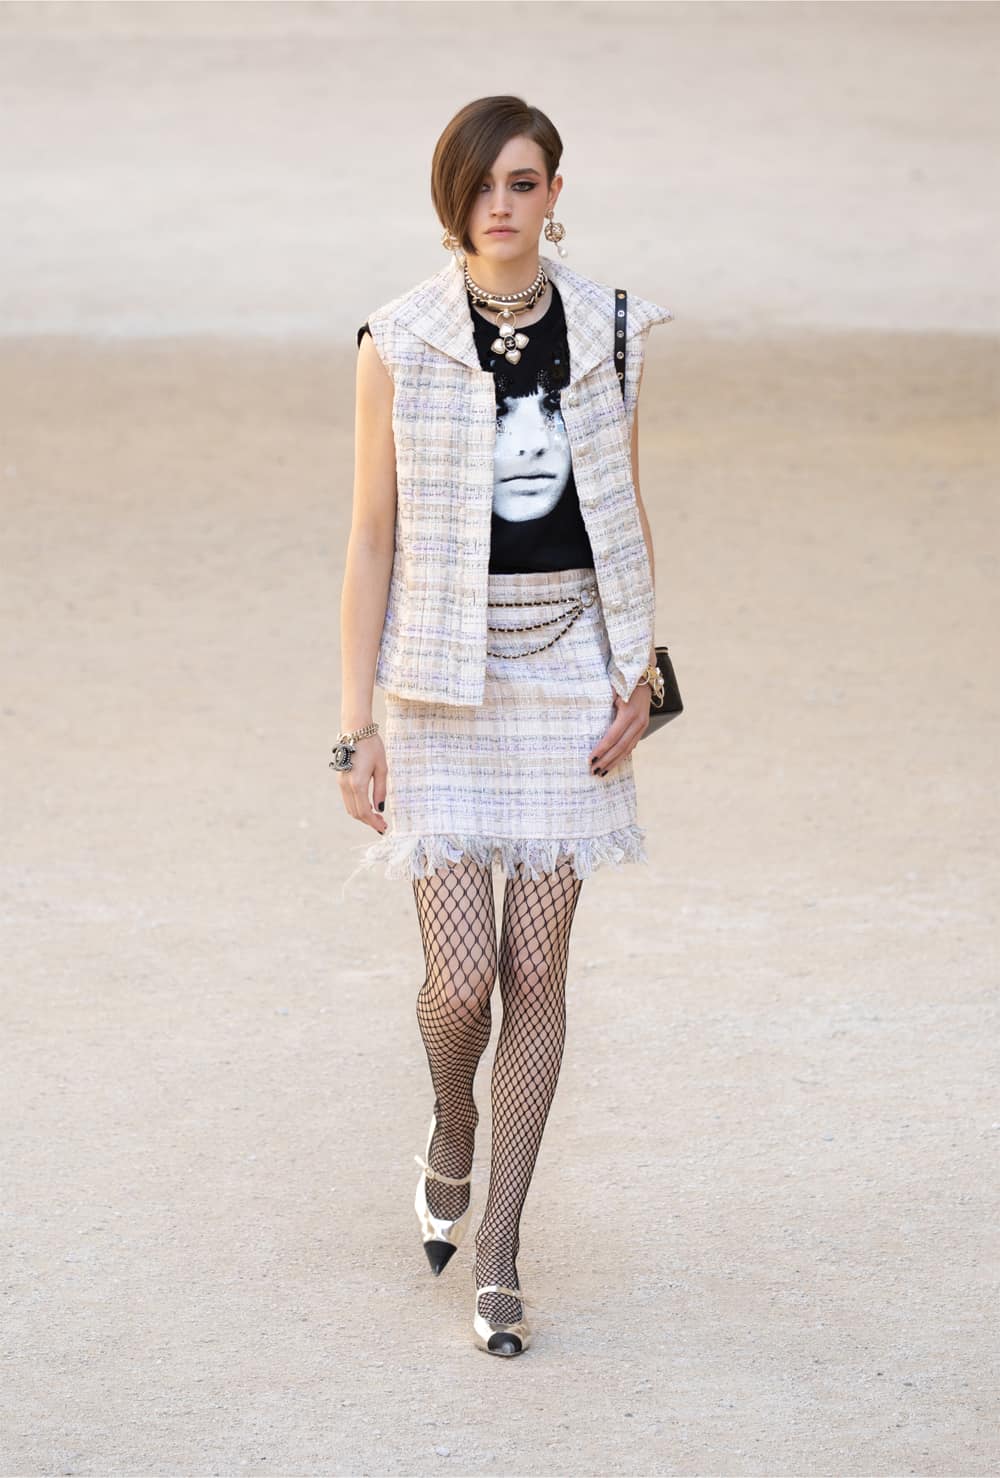 Chanel's Cruise '22 Show Paid Tribute To Brighter Days Ahead